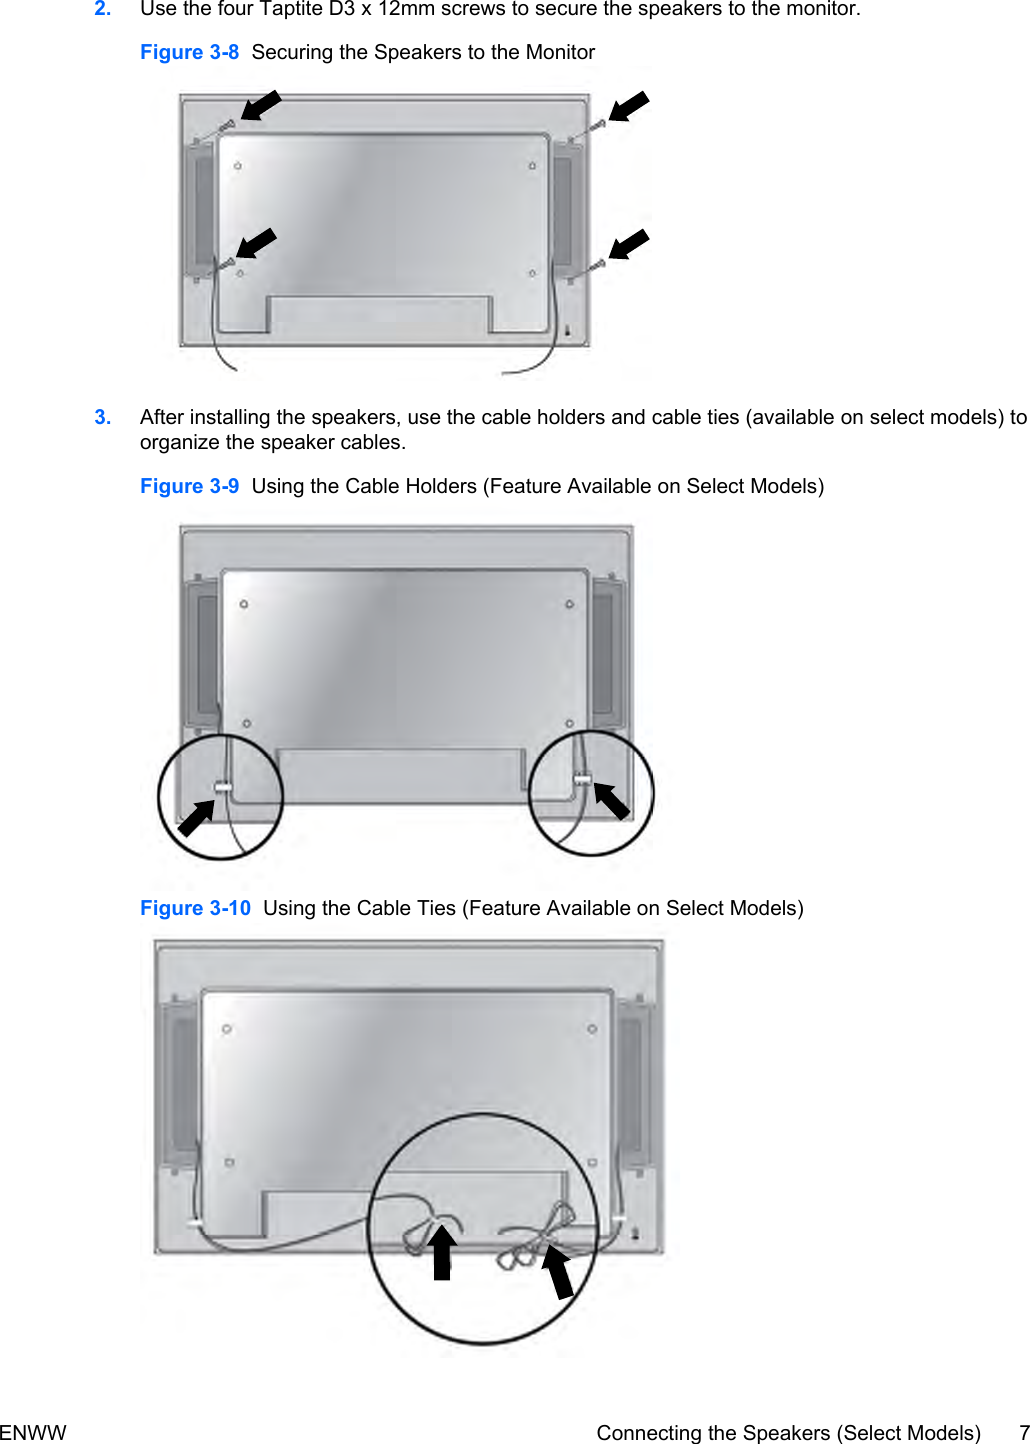 2. Use the four Taptite D3 x 12mm screws to secure the speakers to the monitor.Figure 3-8  Securing the Speakers to the Monitor3. After installing the speakers, use the cable holders and cable ties (available on select models) toorganize the speaker cables.Figure 3-9  Using the Cable Holders (Feature Available on Select Models)Figure 3-10  Using the Cable Ties (Feature Available on Select Models)ENWW Connecting the Speakers (Select Models) 7